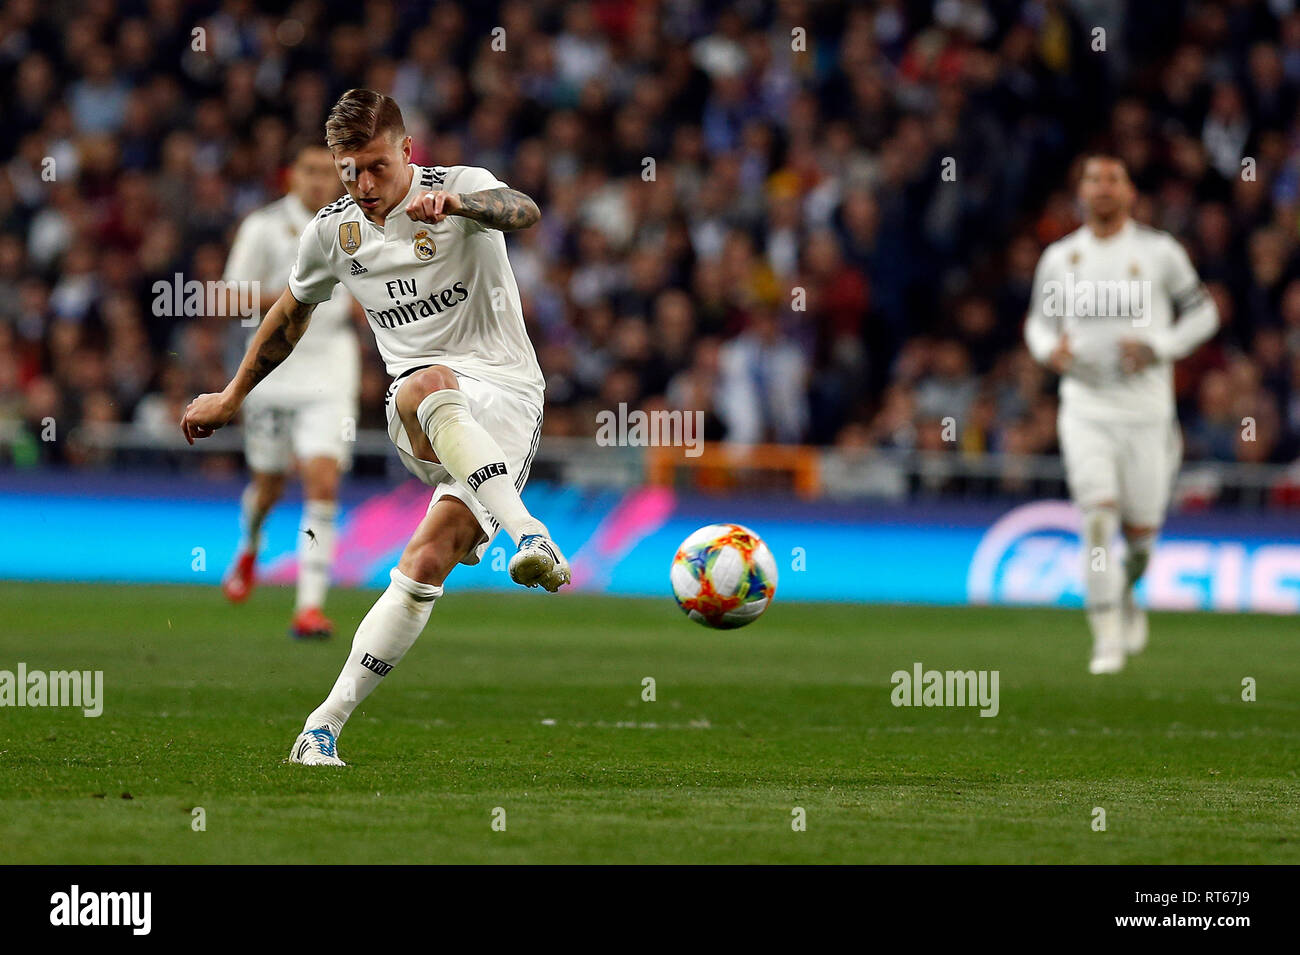 Toni Kroos in action during the Copa del Rey semi final second leg match between Real Madrid CF and FC Barcelona at Santiago Bernabeu Stadium. (Final score Real Madrid 0-3 FC Barcelona) Stock Photo